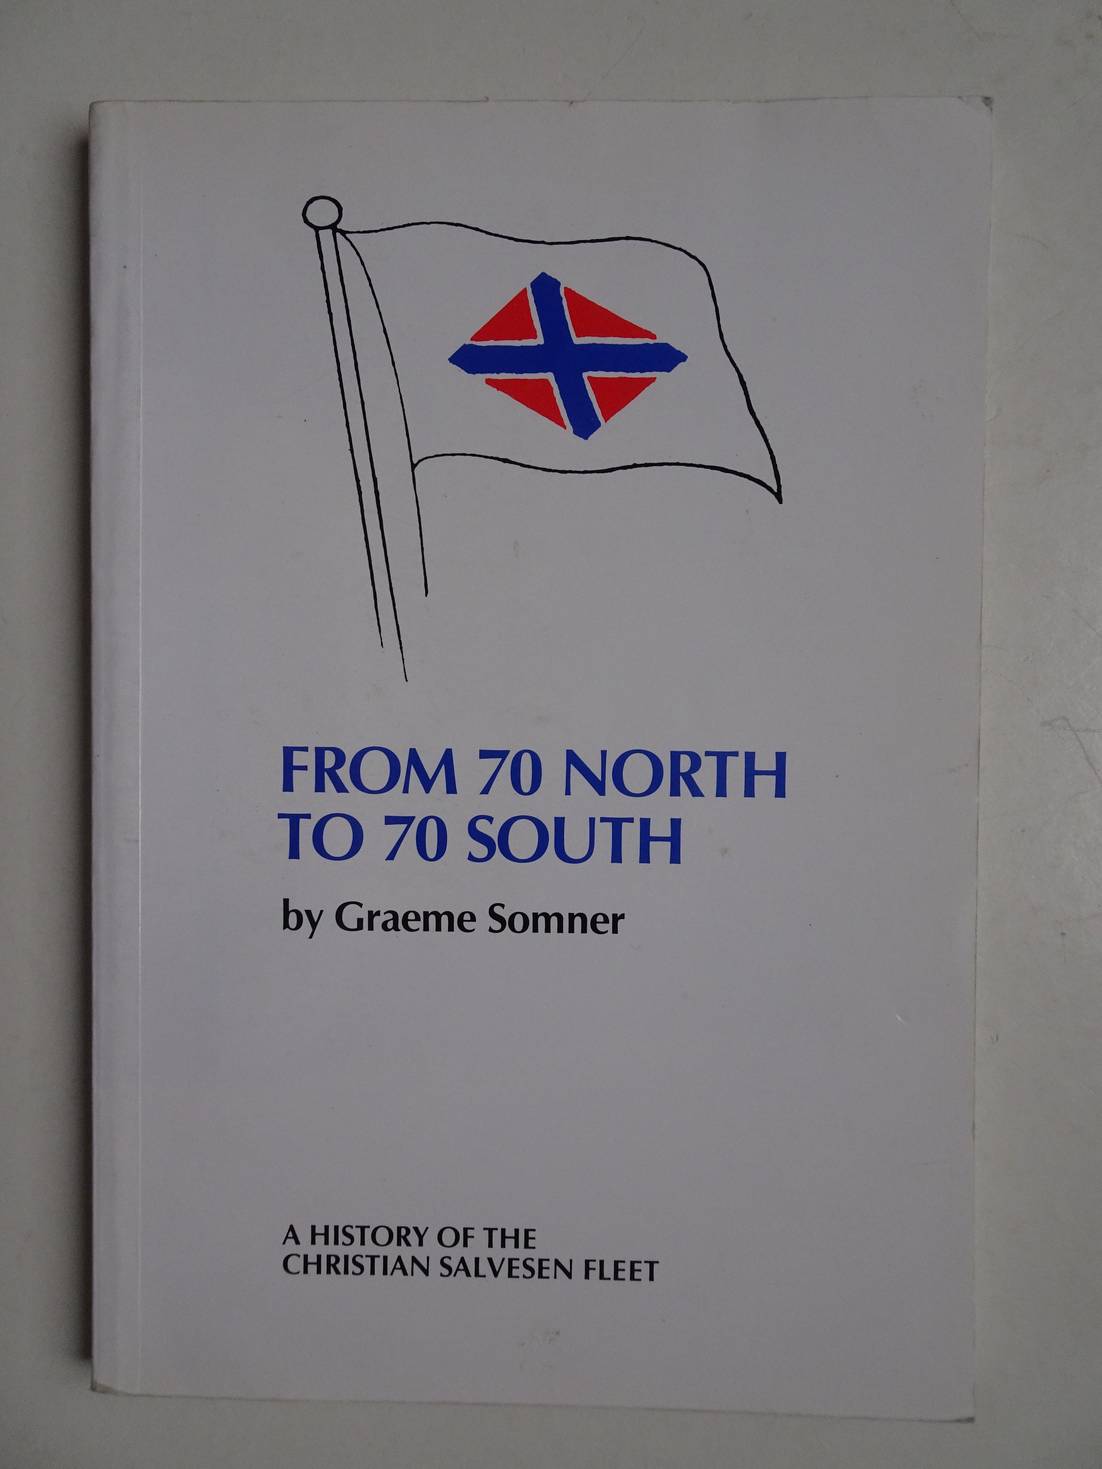 Sommer, Graeme. - From 70 North to 70 South. A history of the Christian Salvesen fleet.